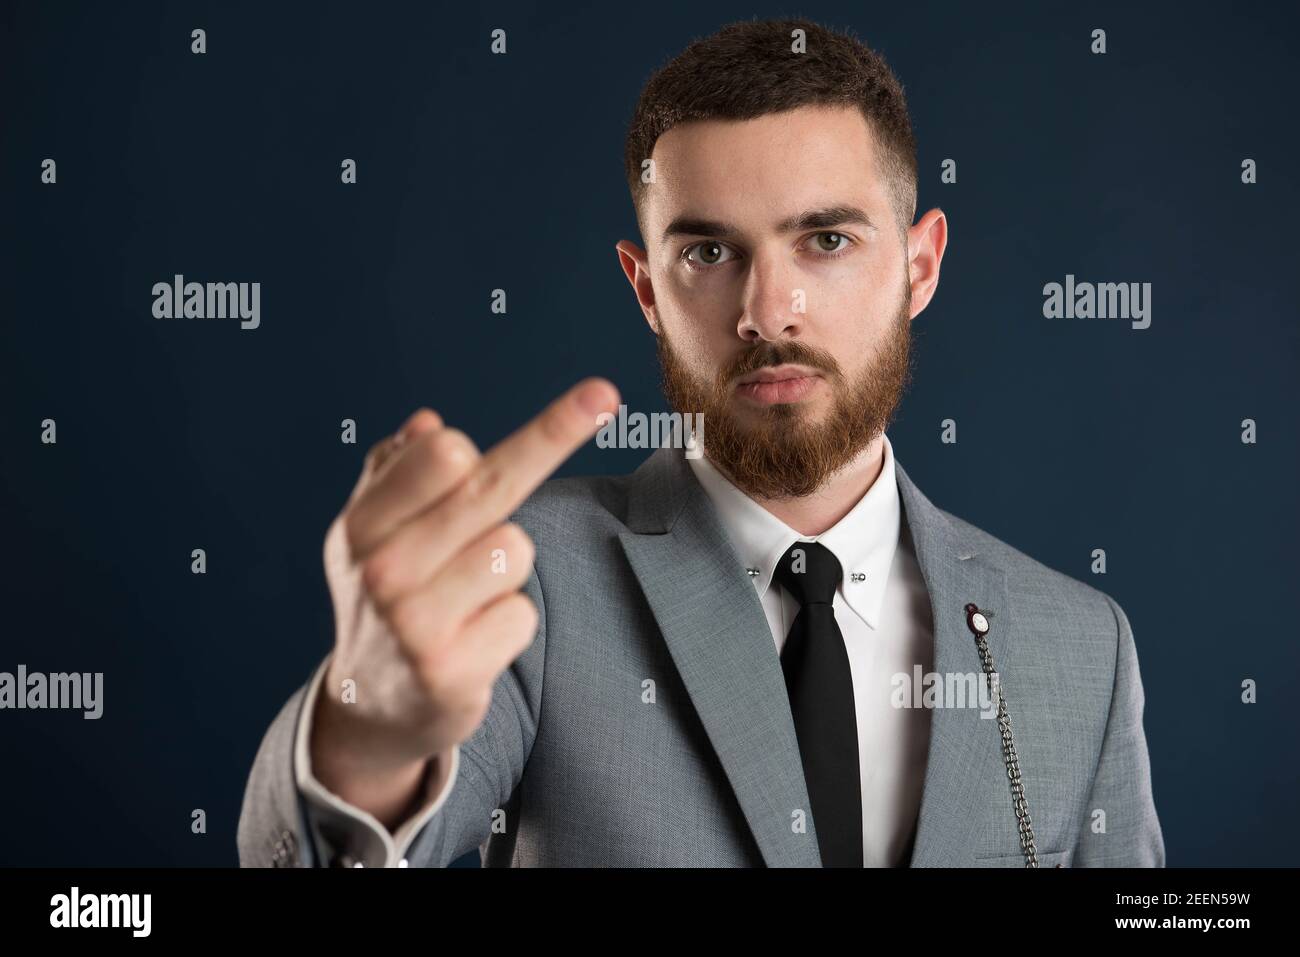 Serious young businessman showing obscene sign wearing a grey suit and a black tie Stock Photo